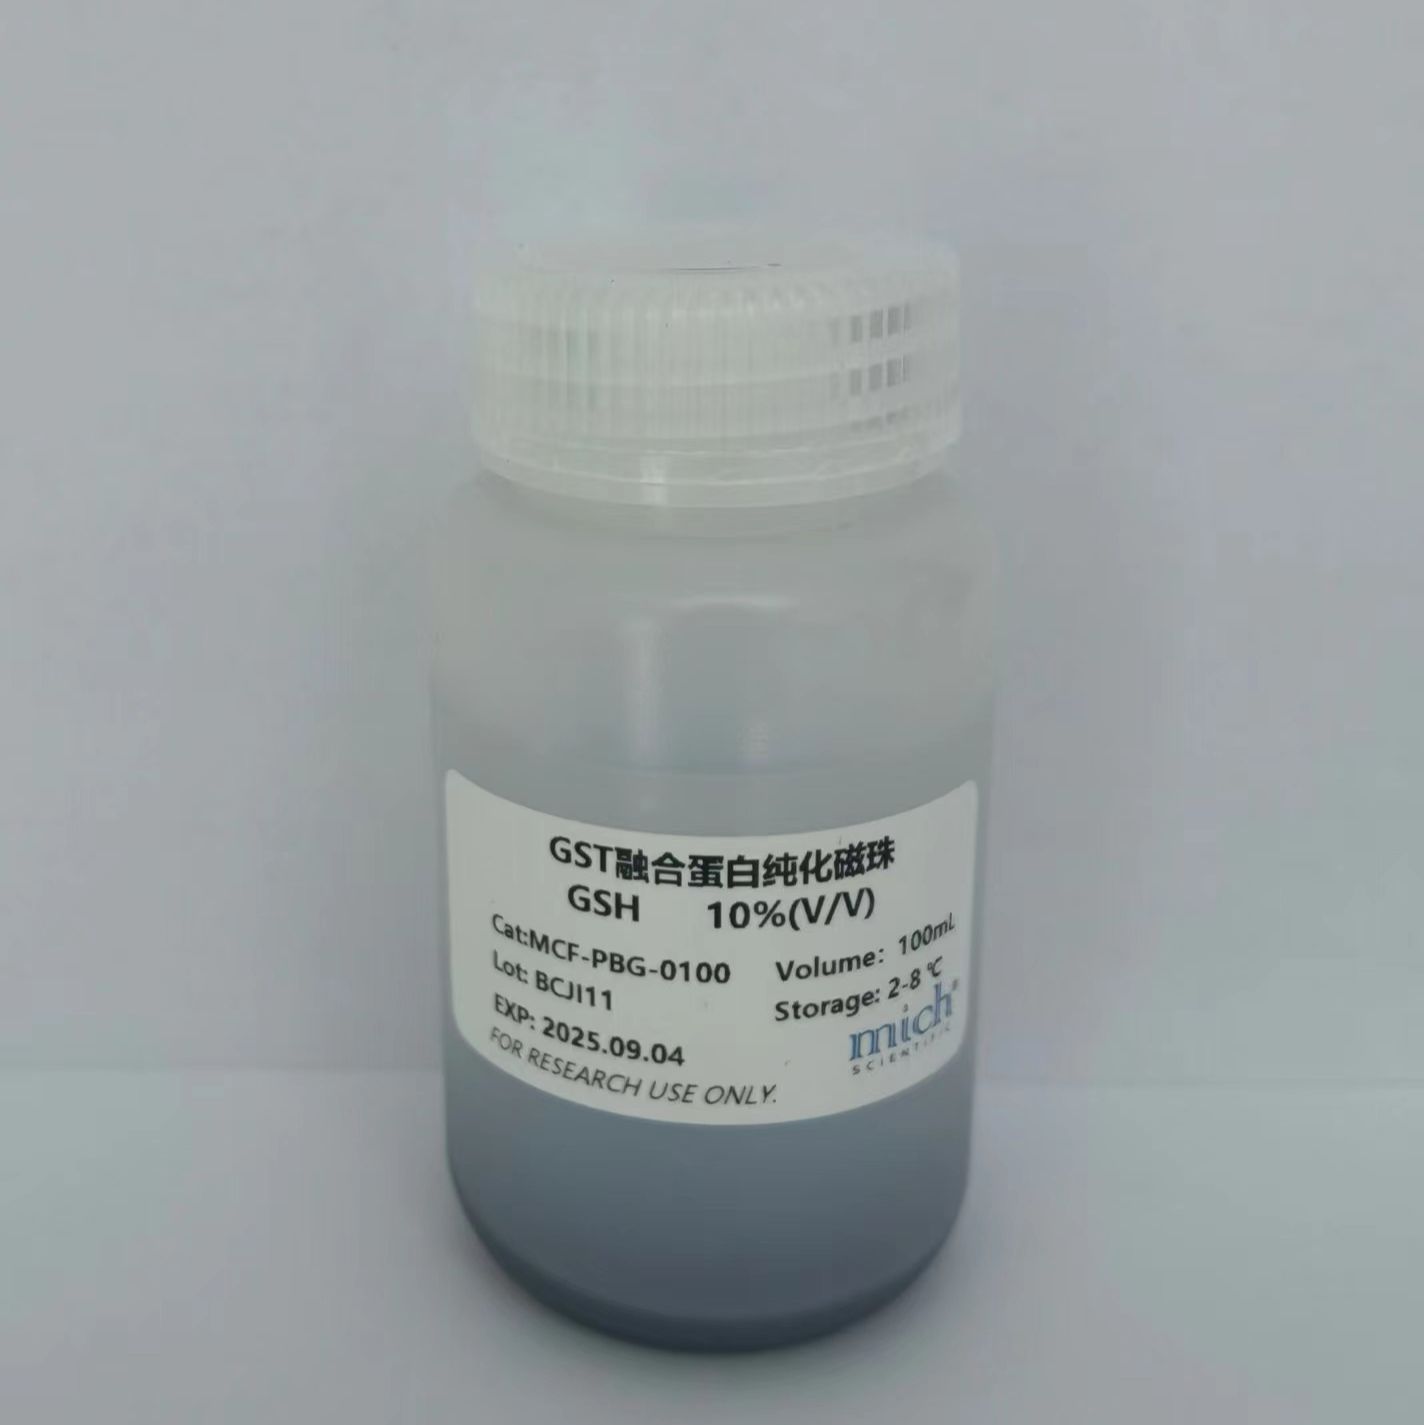 mich® Beads His-tag Protein Purification mich® 组氨酸标签蛋白纯化磁珠